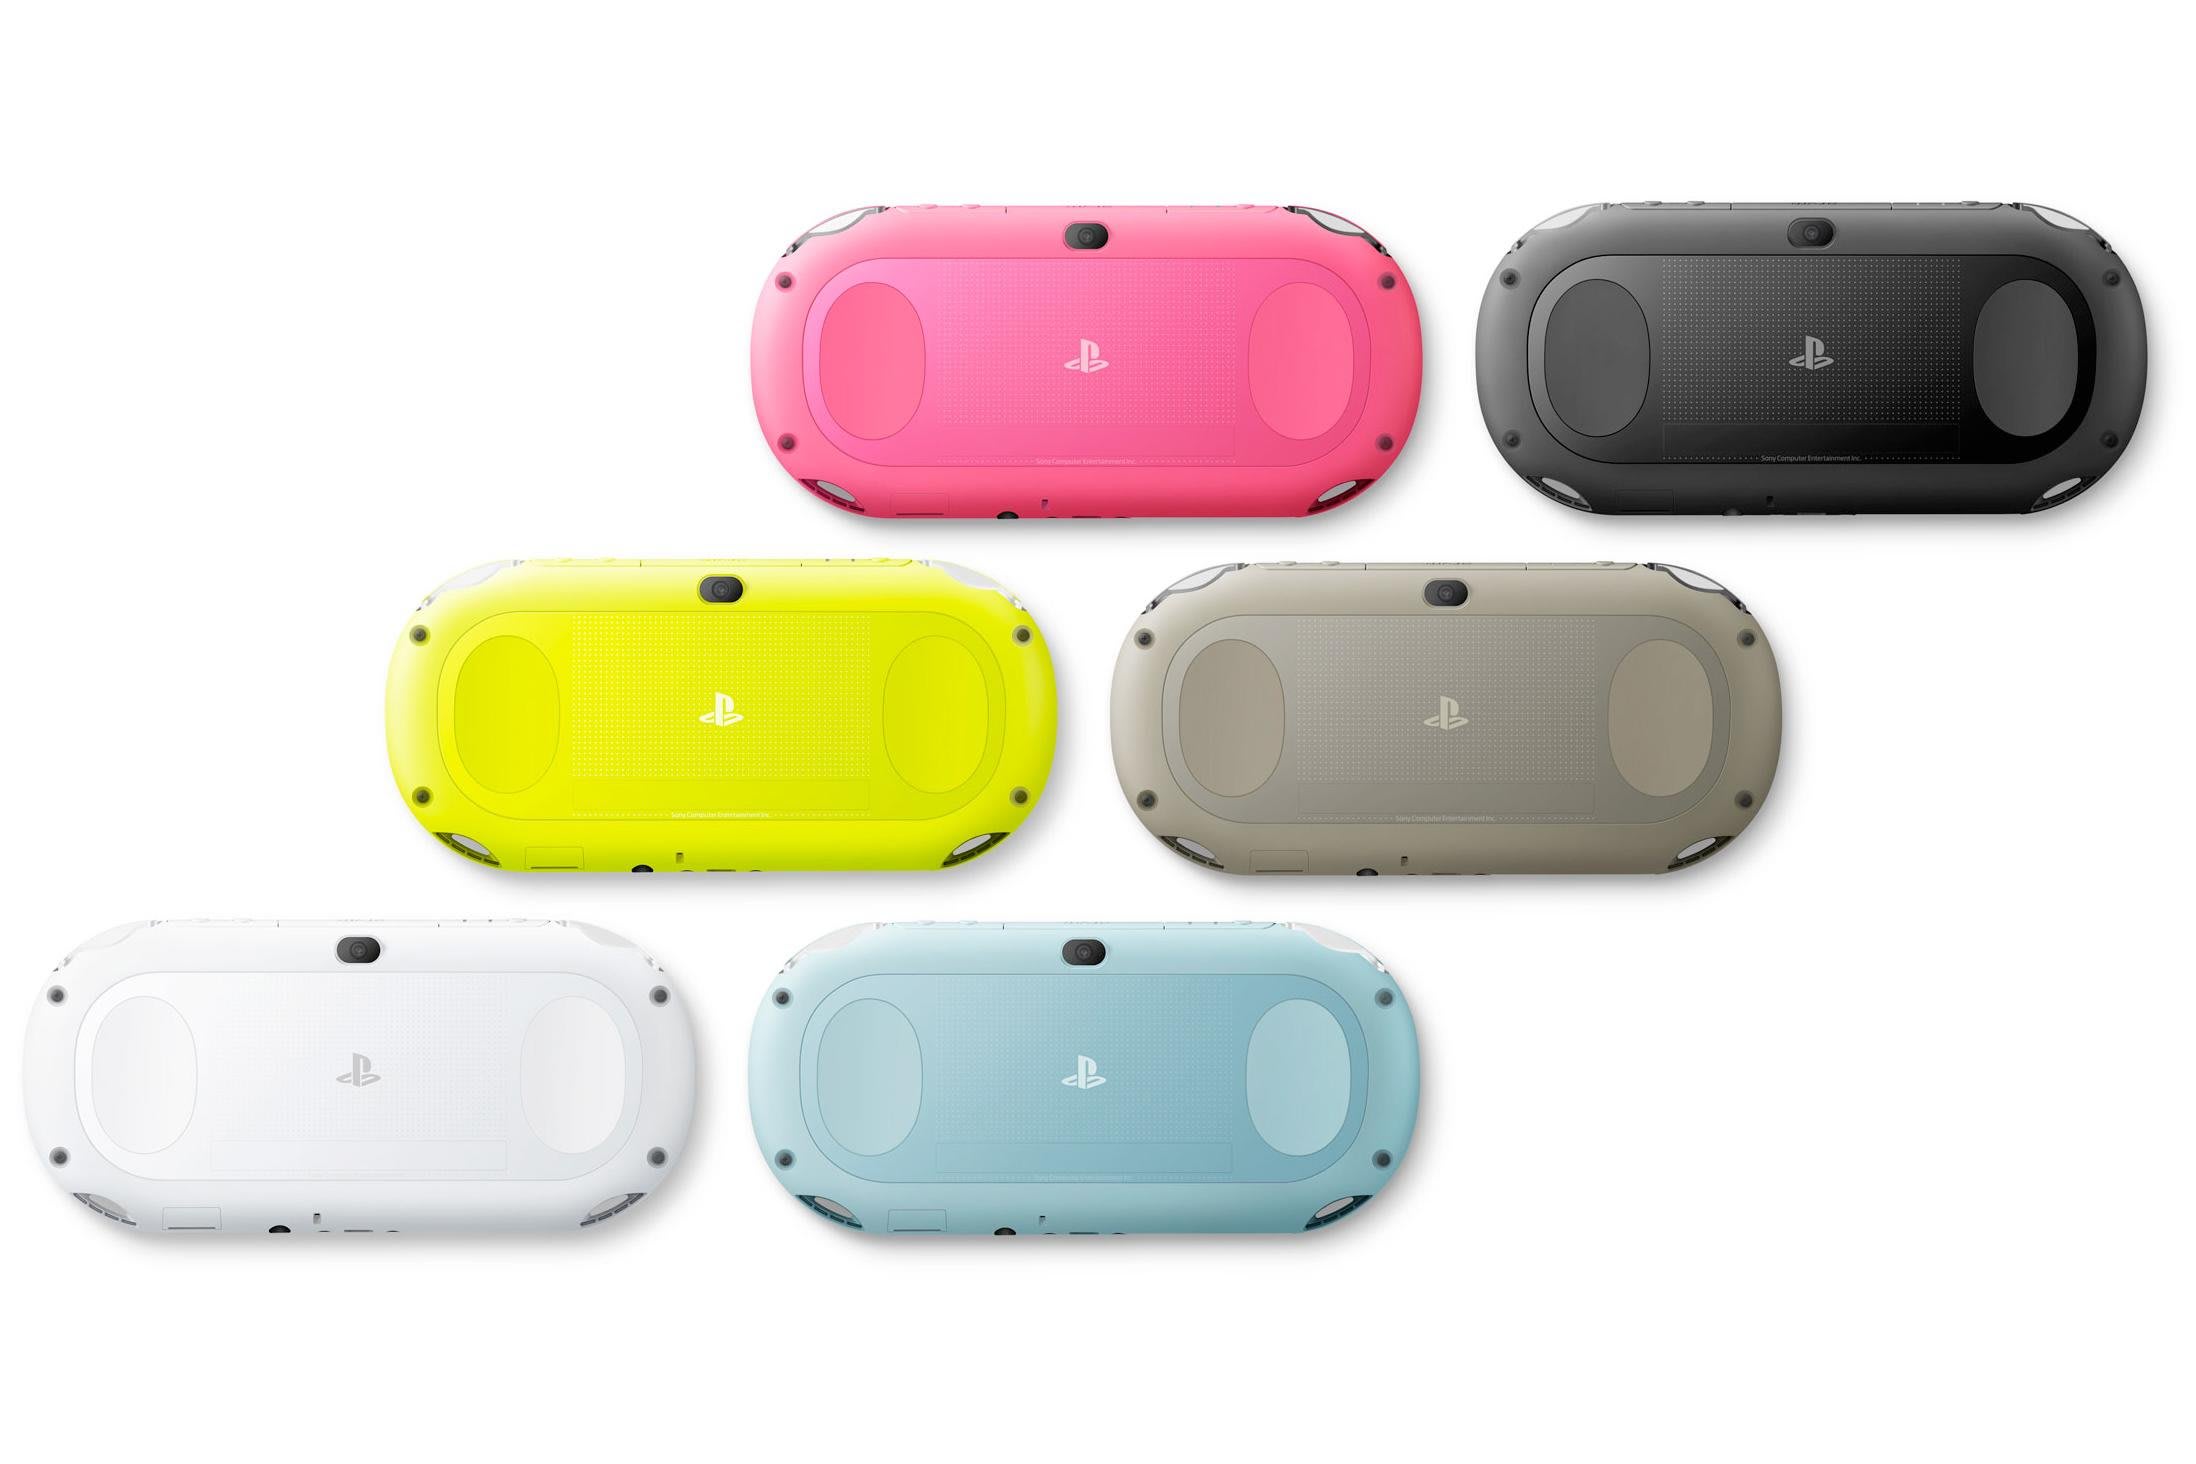 PS Vita changes: How we'd save the Sony PS Vita